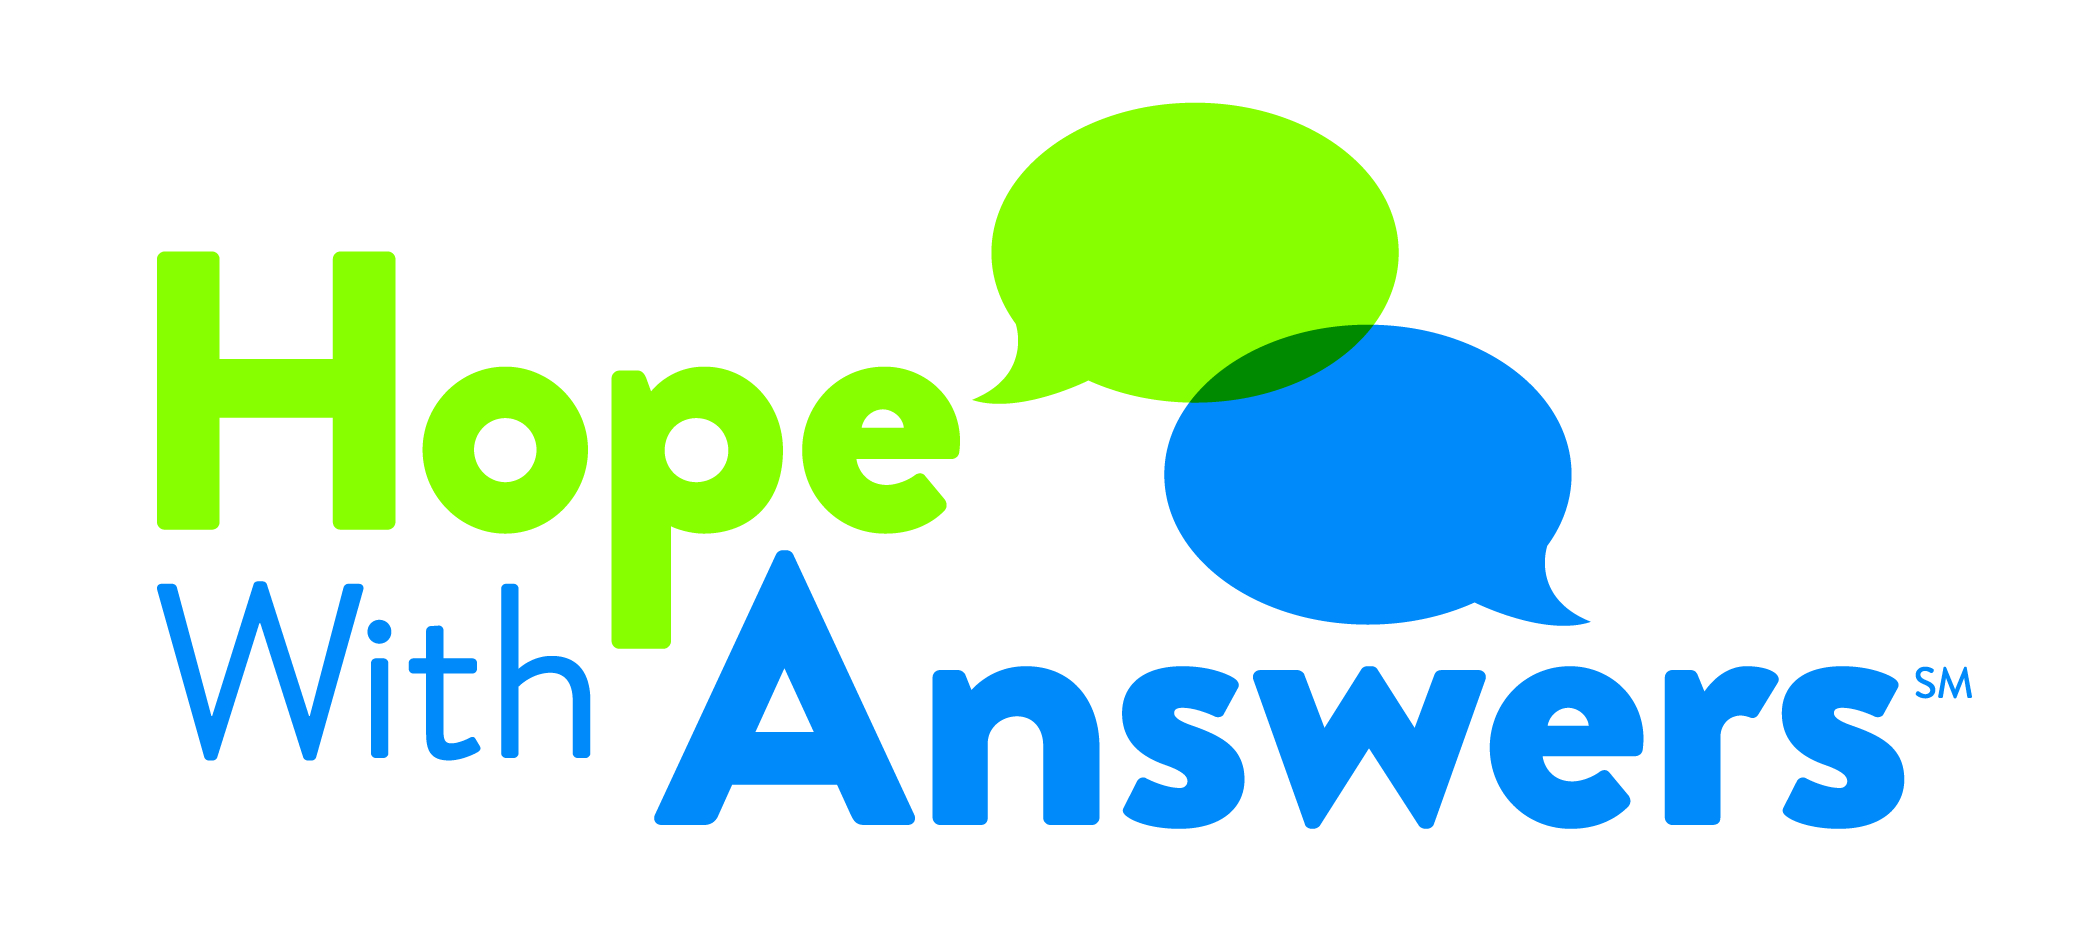 Hope With Answers℠ can help you.

A lung cancer diagnosis can be like going to a foreign country. You need to learn a new language. In order to get where you want to go, you need to learn what questions to ask and how to ask them.

At first, it all seems terribly daunting. You can’t take in everything. You feel the need to digest the information you need step by step. You need your family and caregivers to know and understand what’s happening, too.

It’s time to bring the patient/caregiver/physician conversation into the home.
